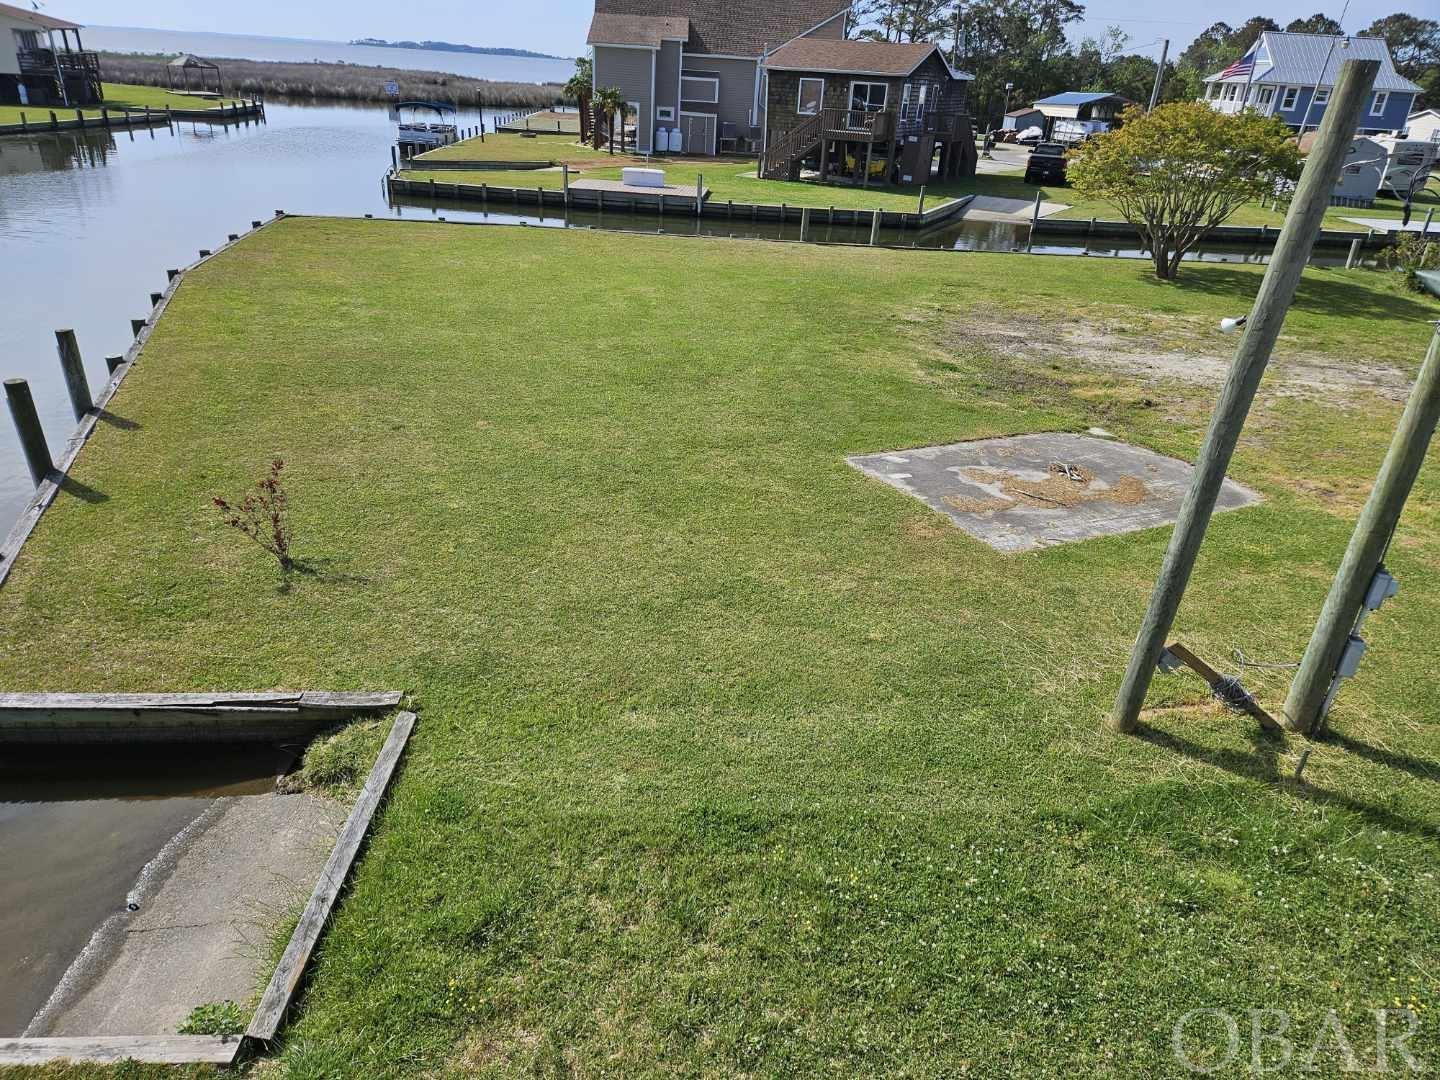 Call Steve Jernigan at 252-489-5007 for info.  Great lot for an outdoor lifestyle with Corner/Canalfront Deep Water access to Currituck Sound.  Quiet neighborhood for any taste from weekend getaway, second or family residence.  Central to all regional activities and historical venues.  To many options to list( Build your own, to suit, modulars, etc)